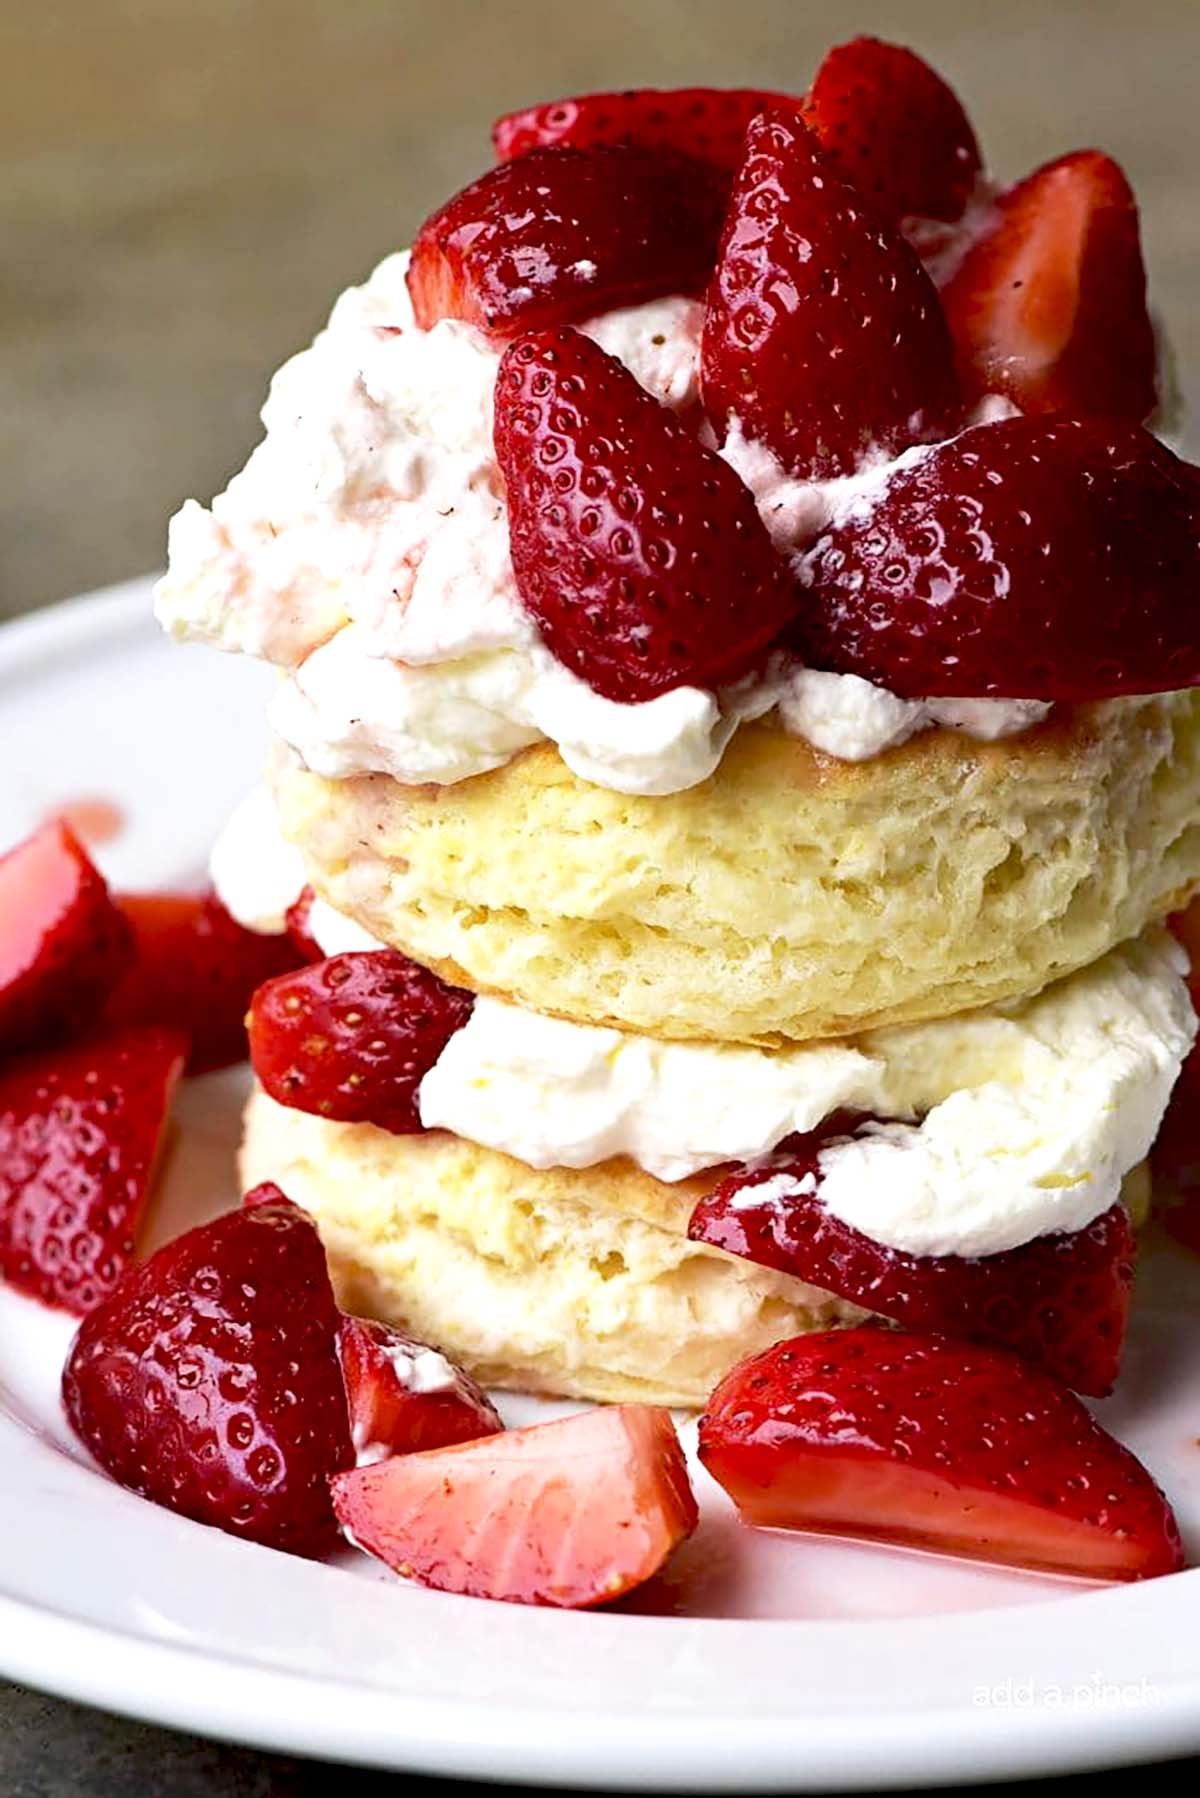 Strawberry shortcake with layers of sliced strawberries and whipped cream on a white plate on a brown background.